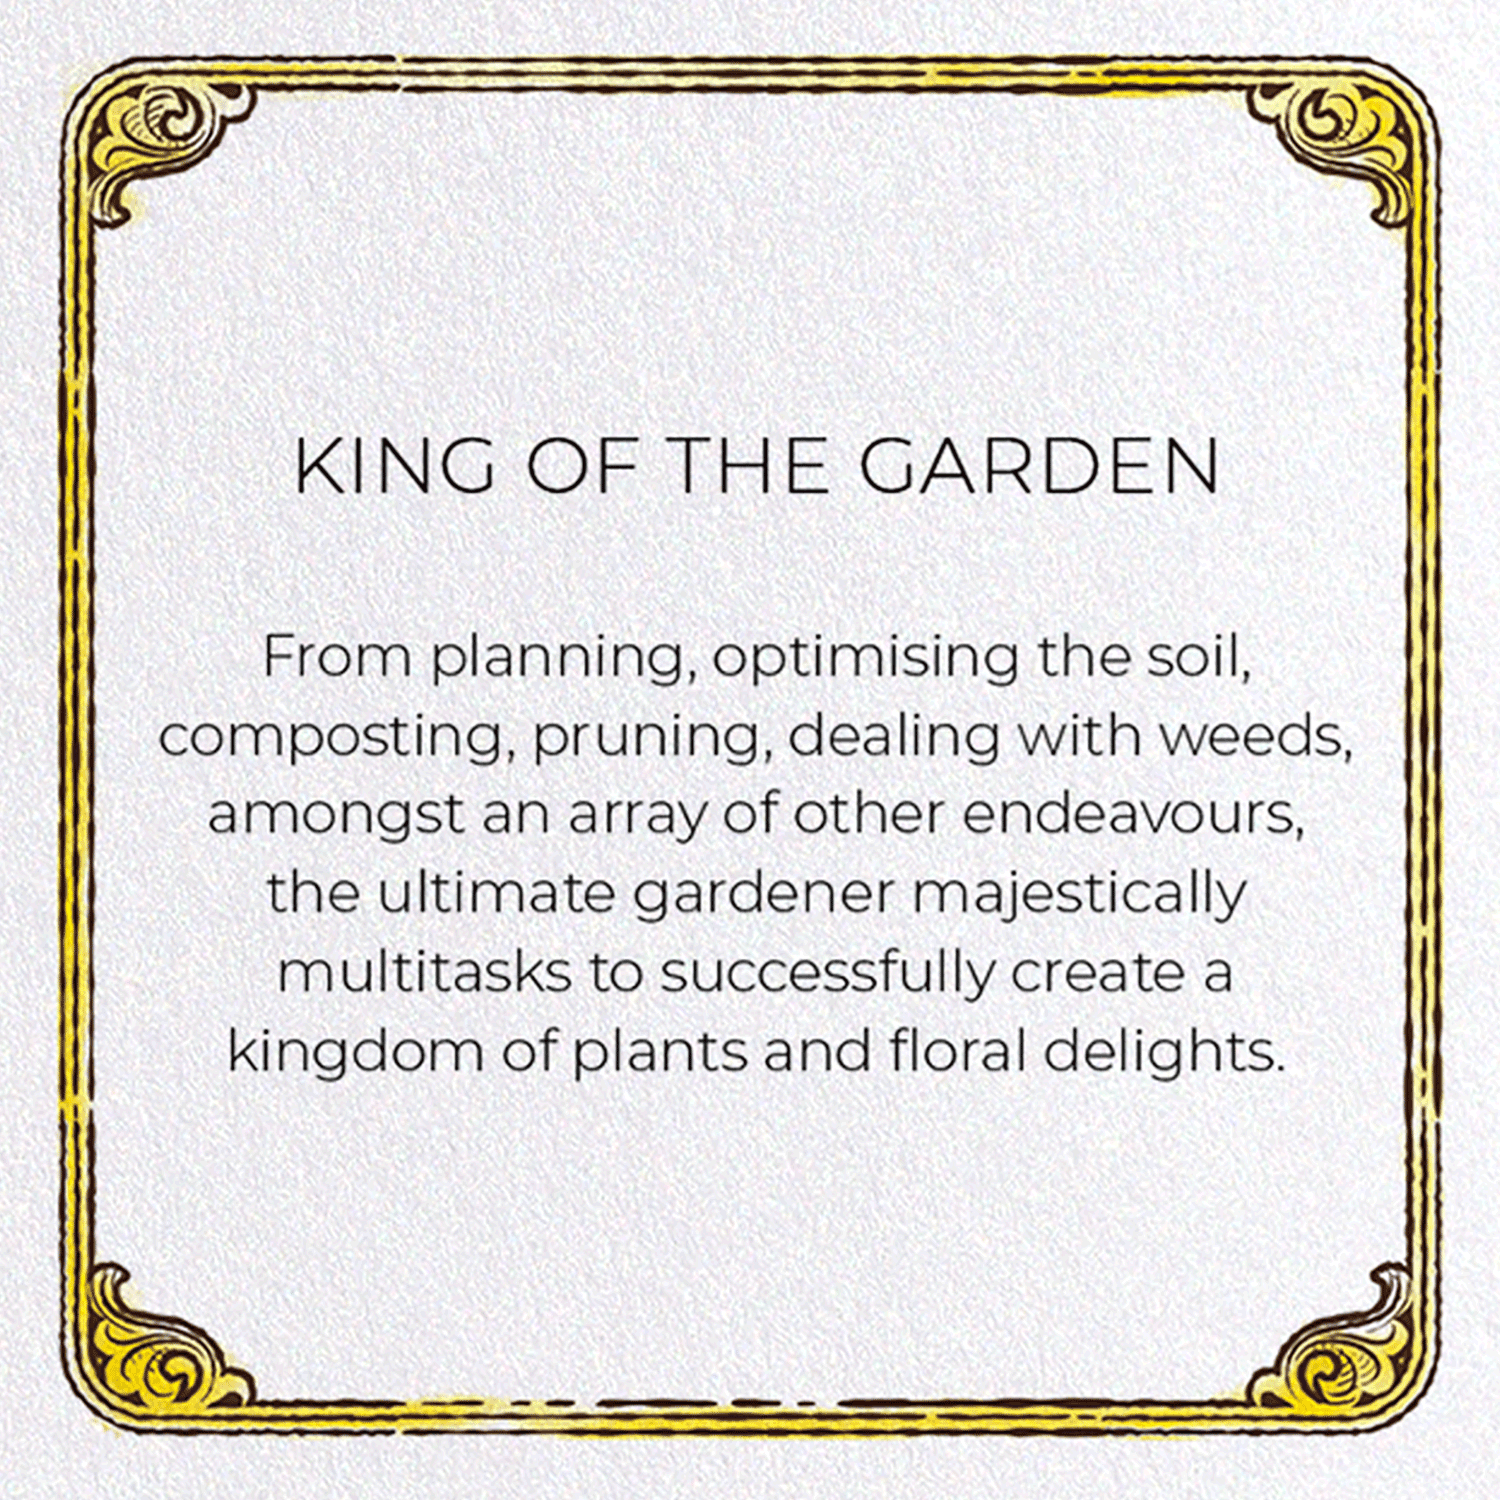 KING OF THE GARDEN: Victorian Greeting Card